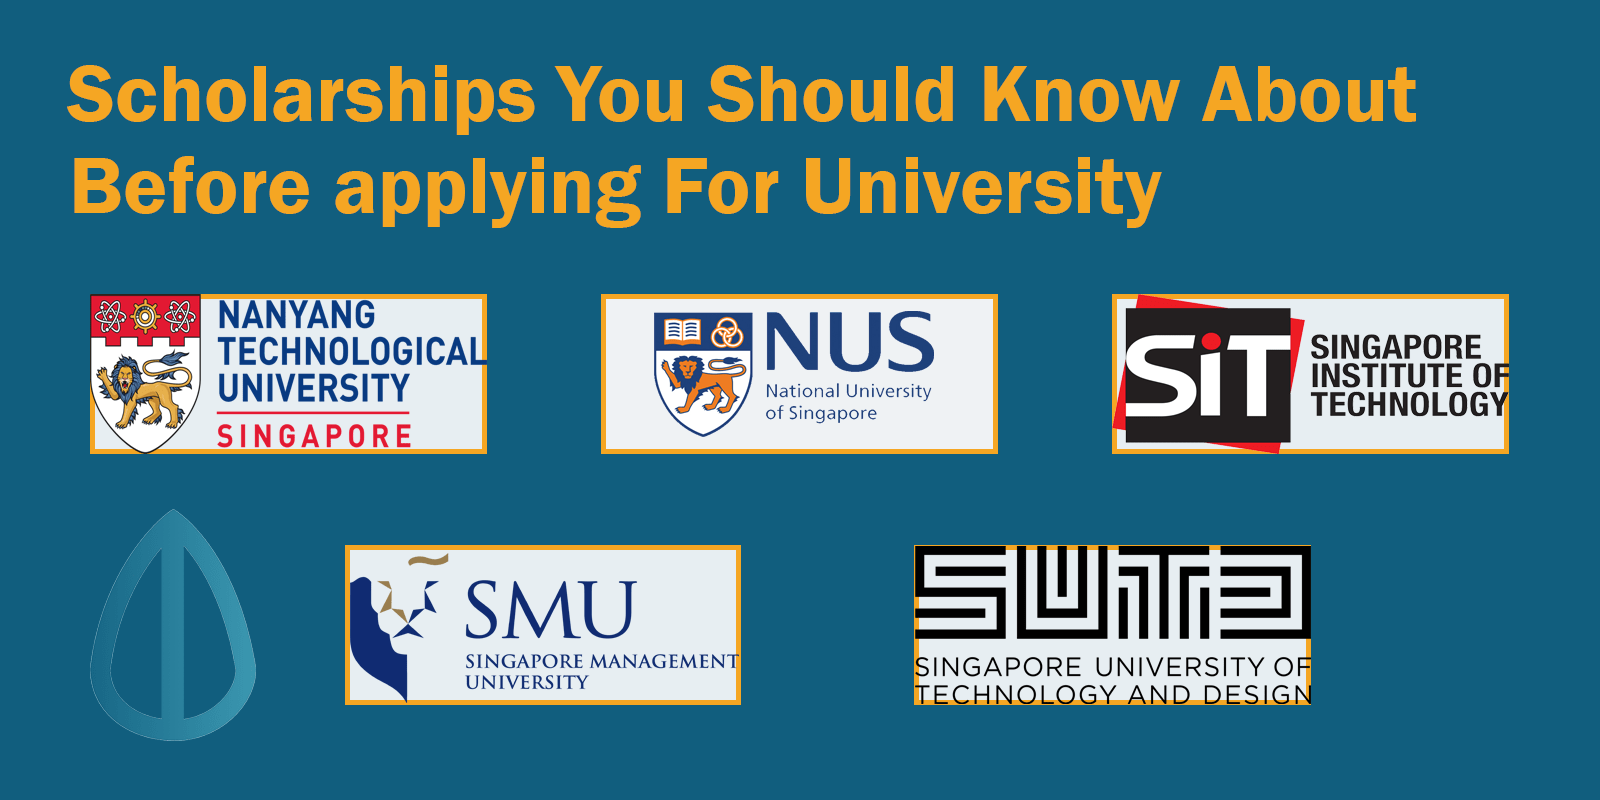 Scholarships You Should Know About Before Applying For University